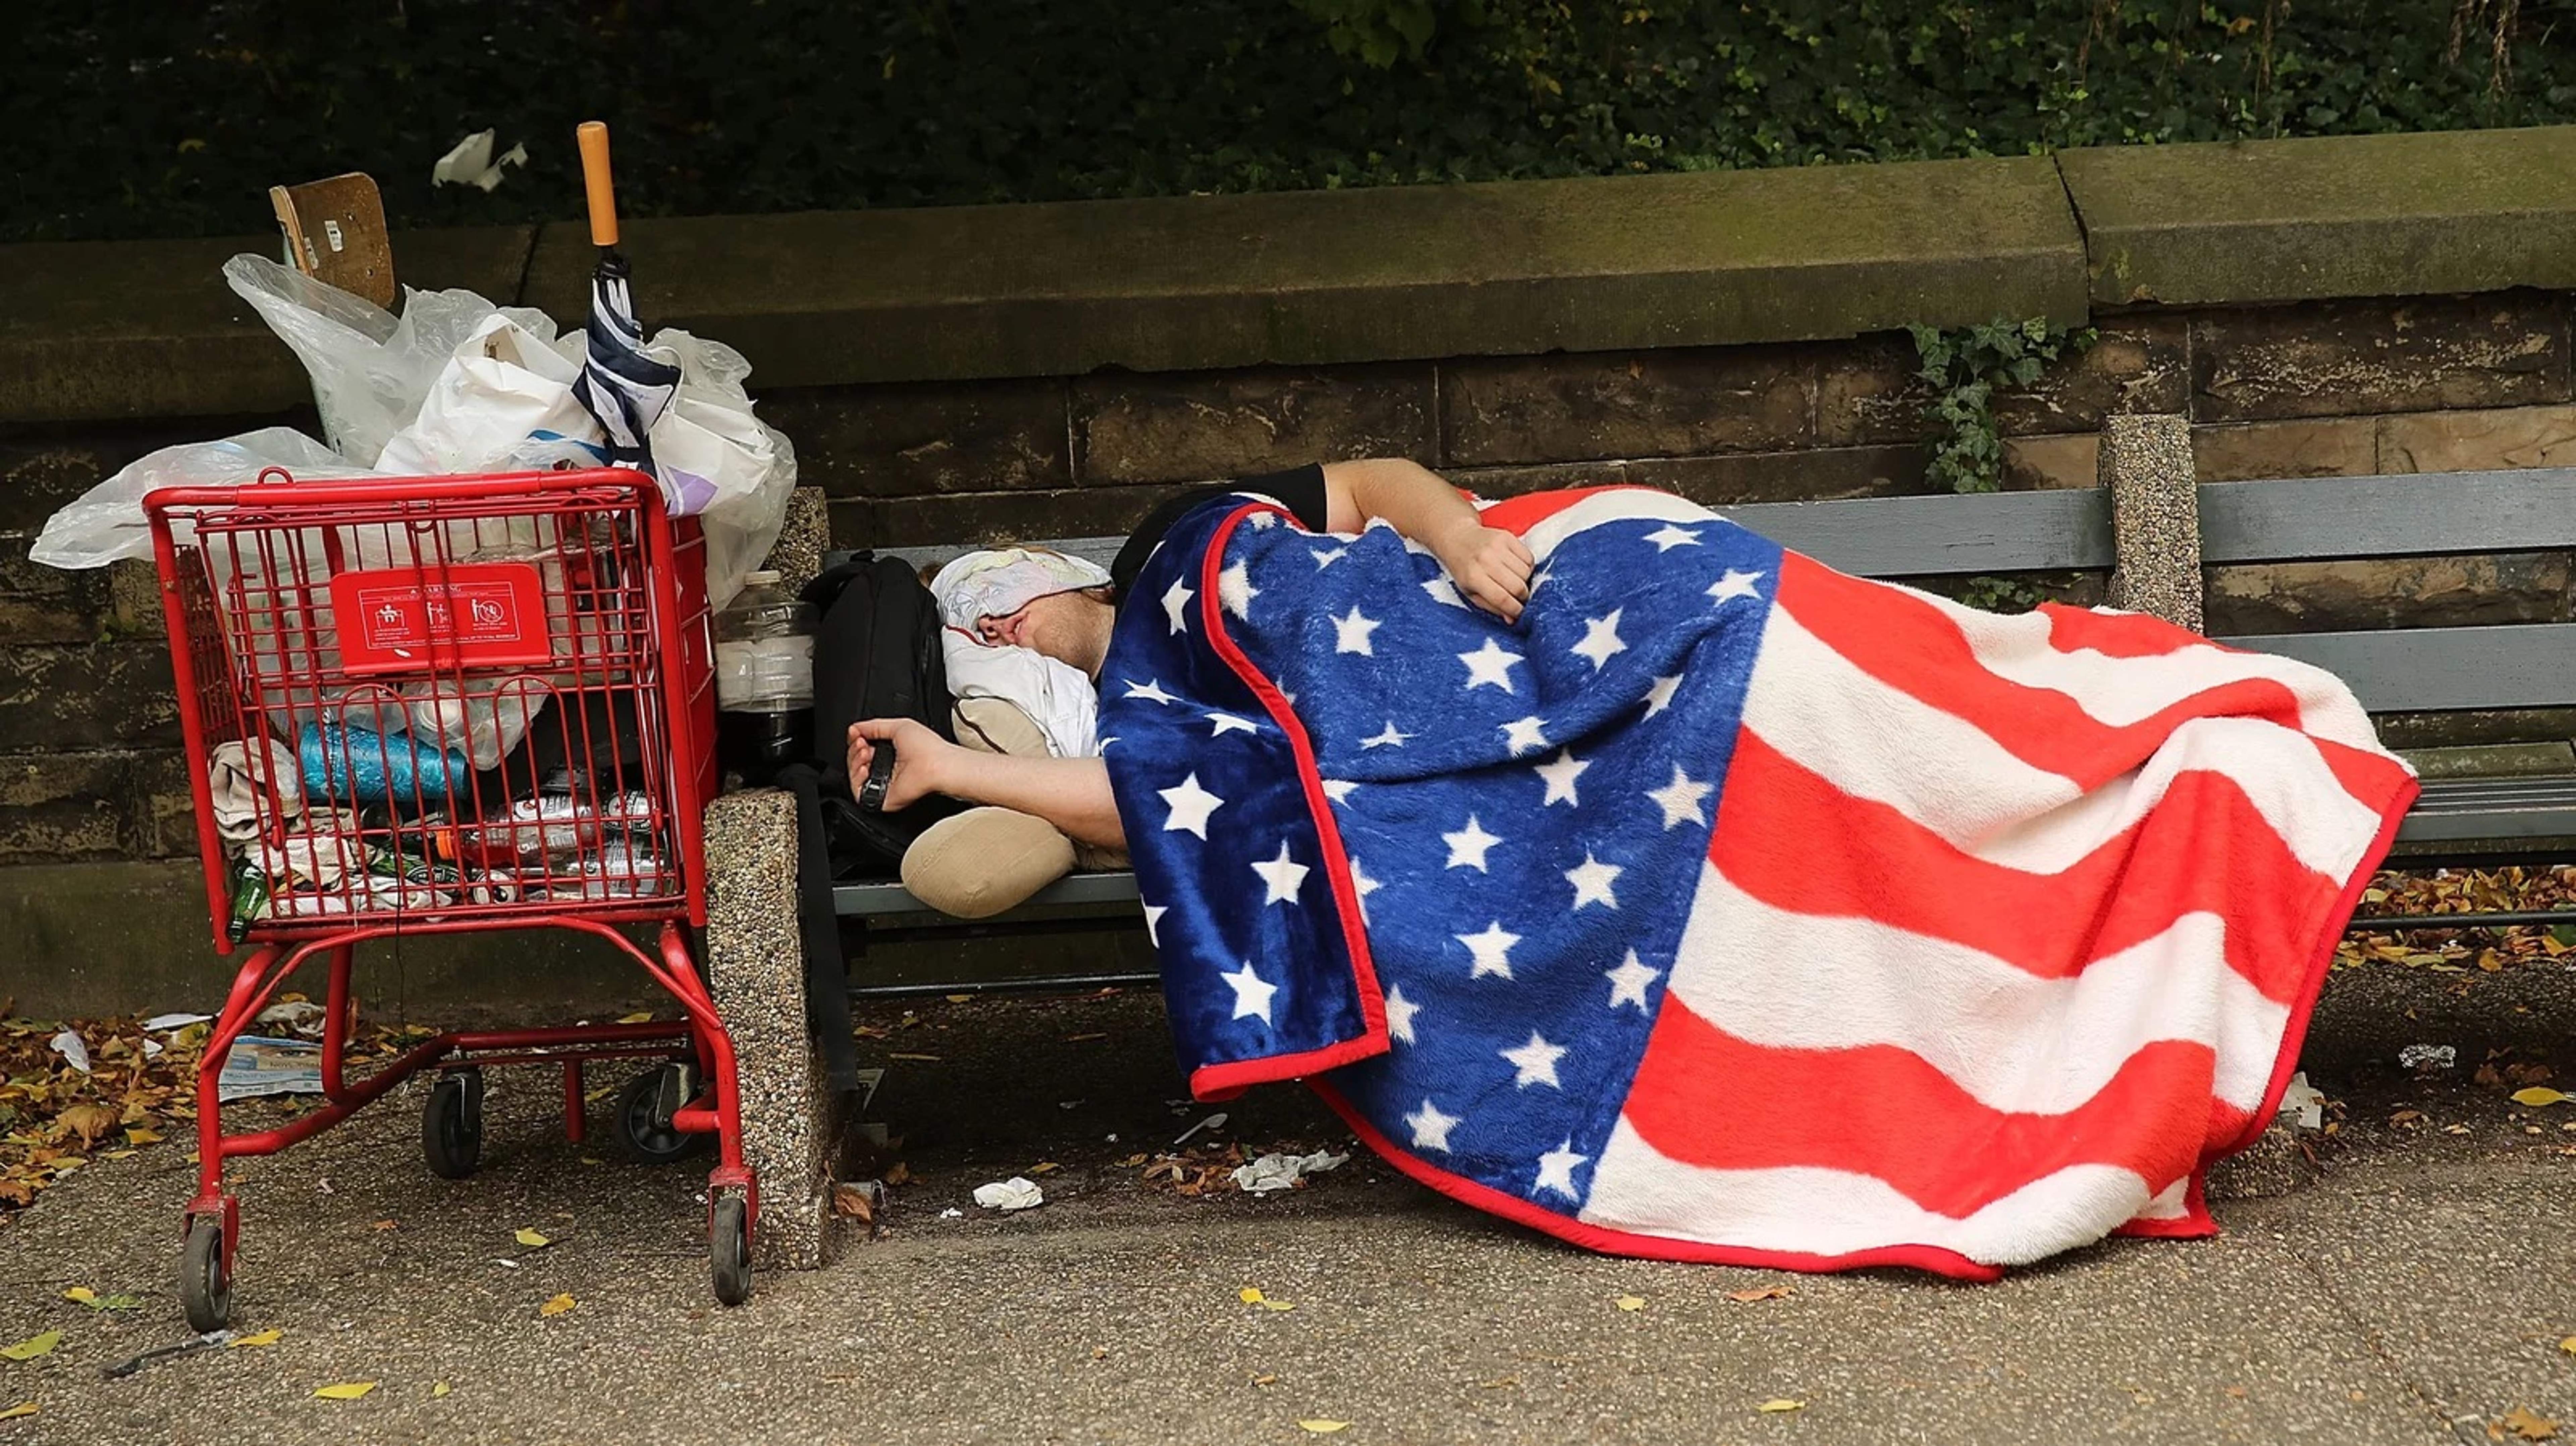 Unhoused person sleeping on a bench with an American flag blanket.